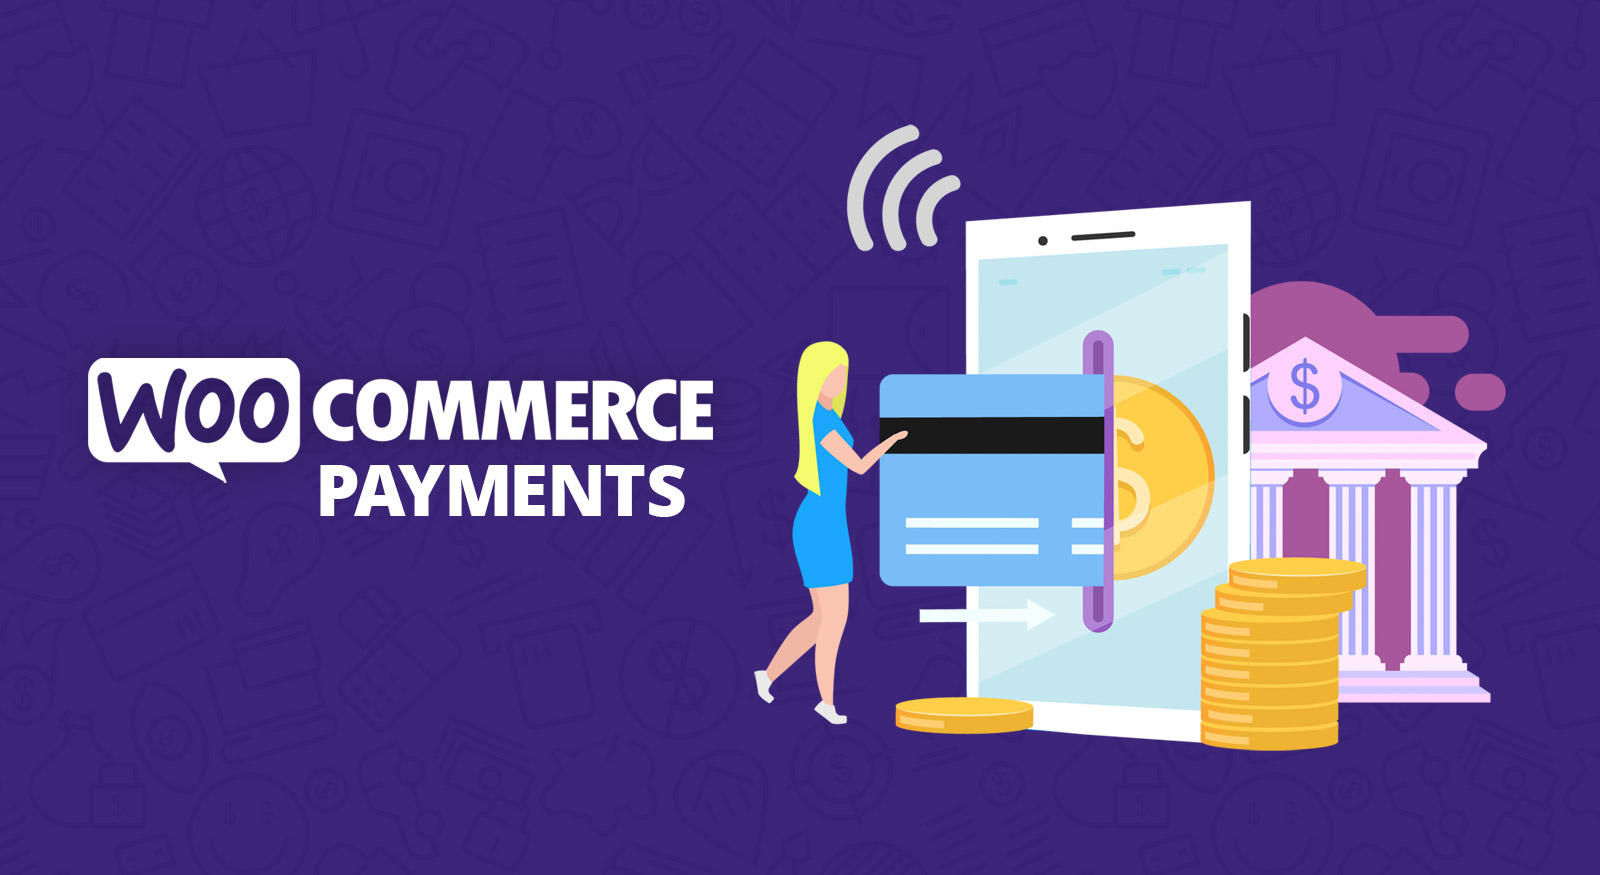 Woocommerce Payments - Onepoint Software Solutions Brisbane eCommerce Developers